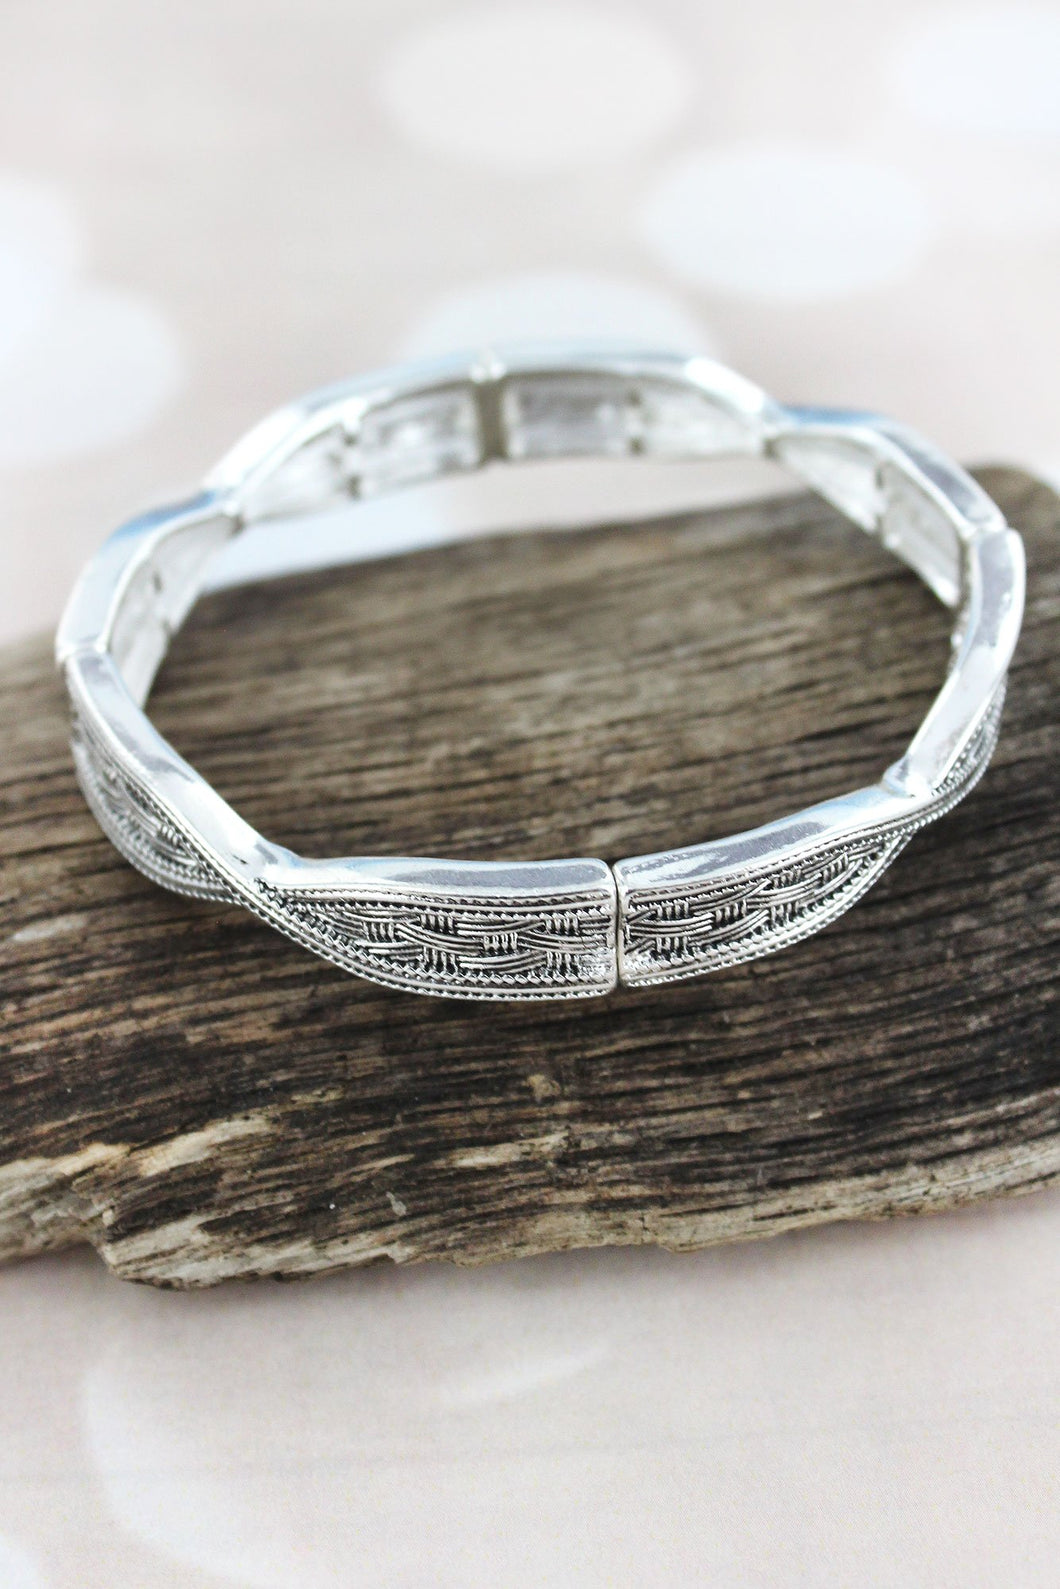 ANTIQUE SILVERTONE BASKET WEAVE TWISTING BRACELET - Unique Inspirations by Tracy and Anna